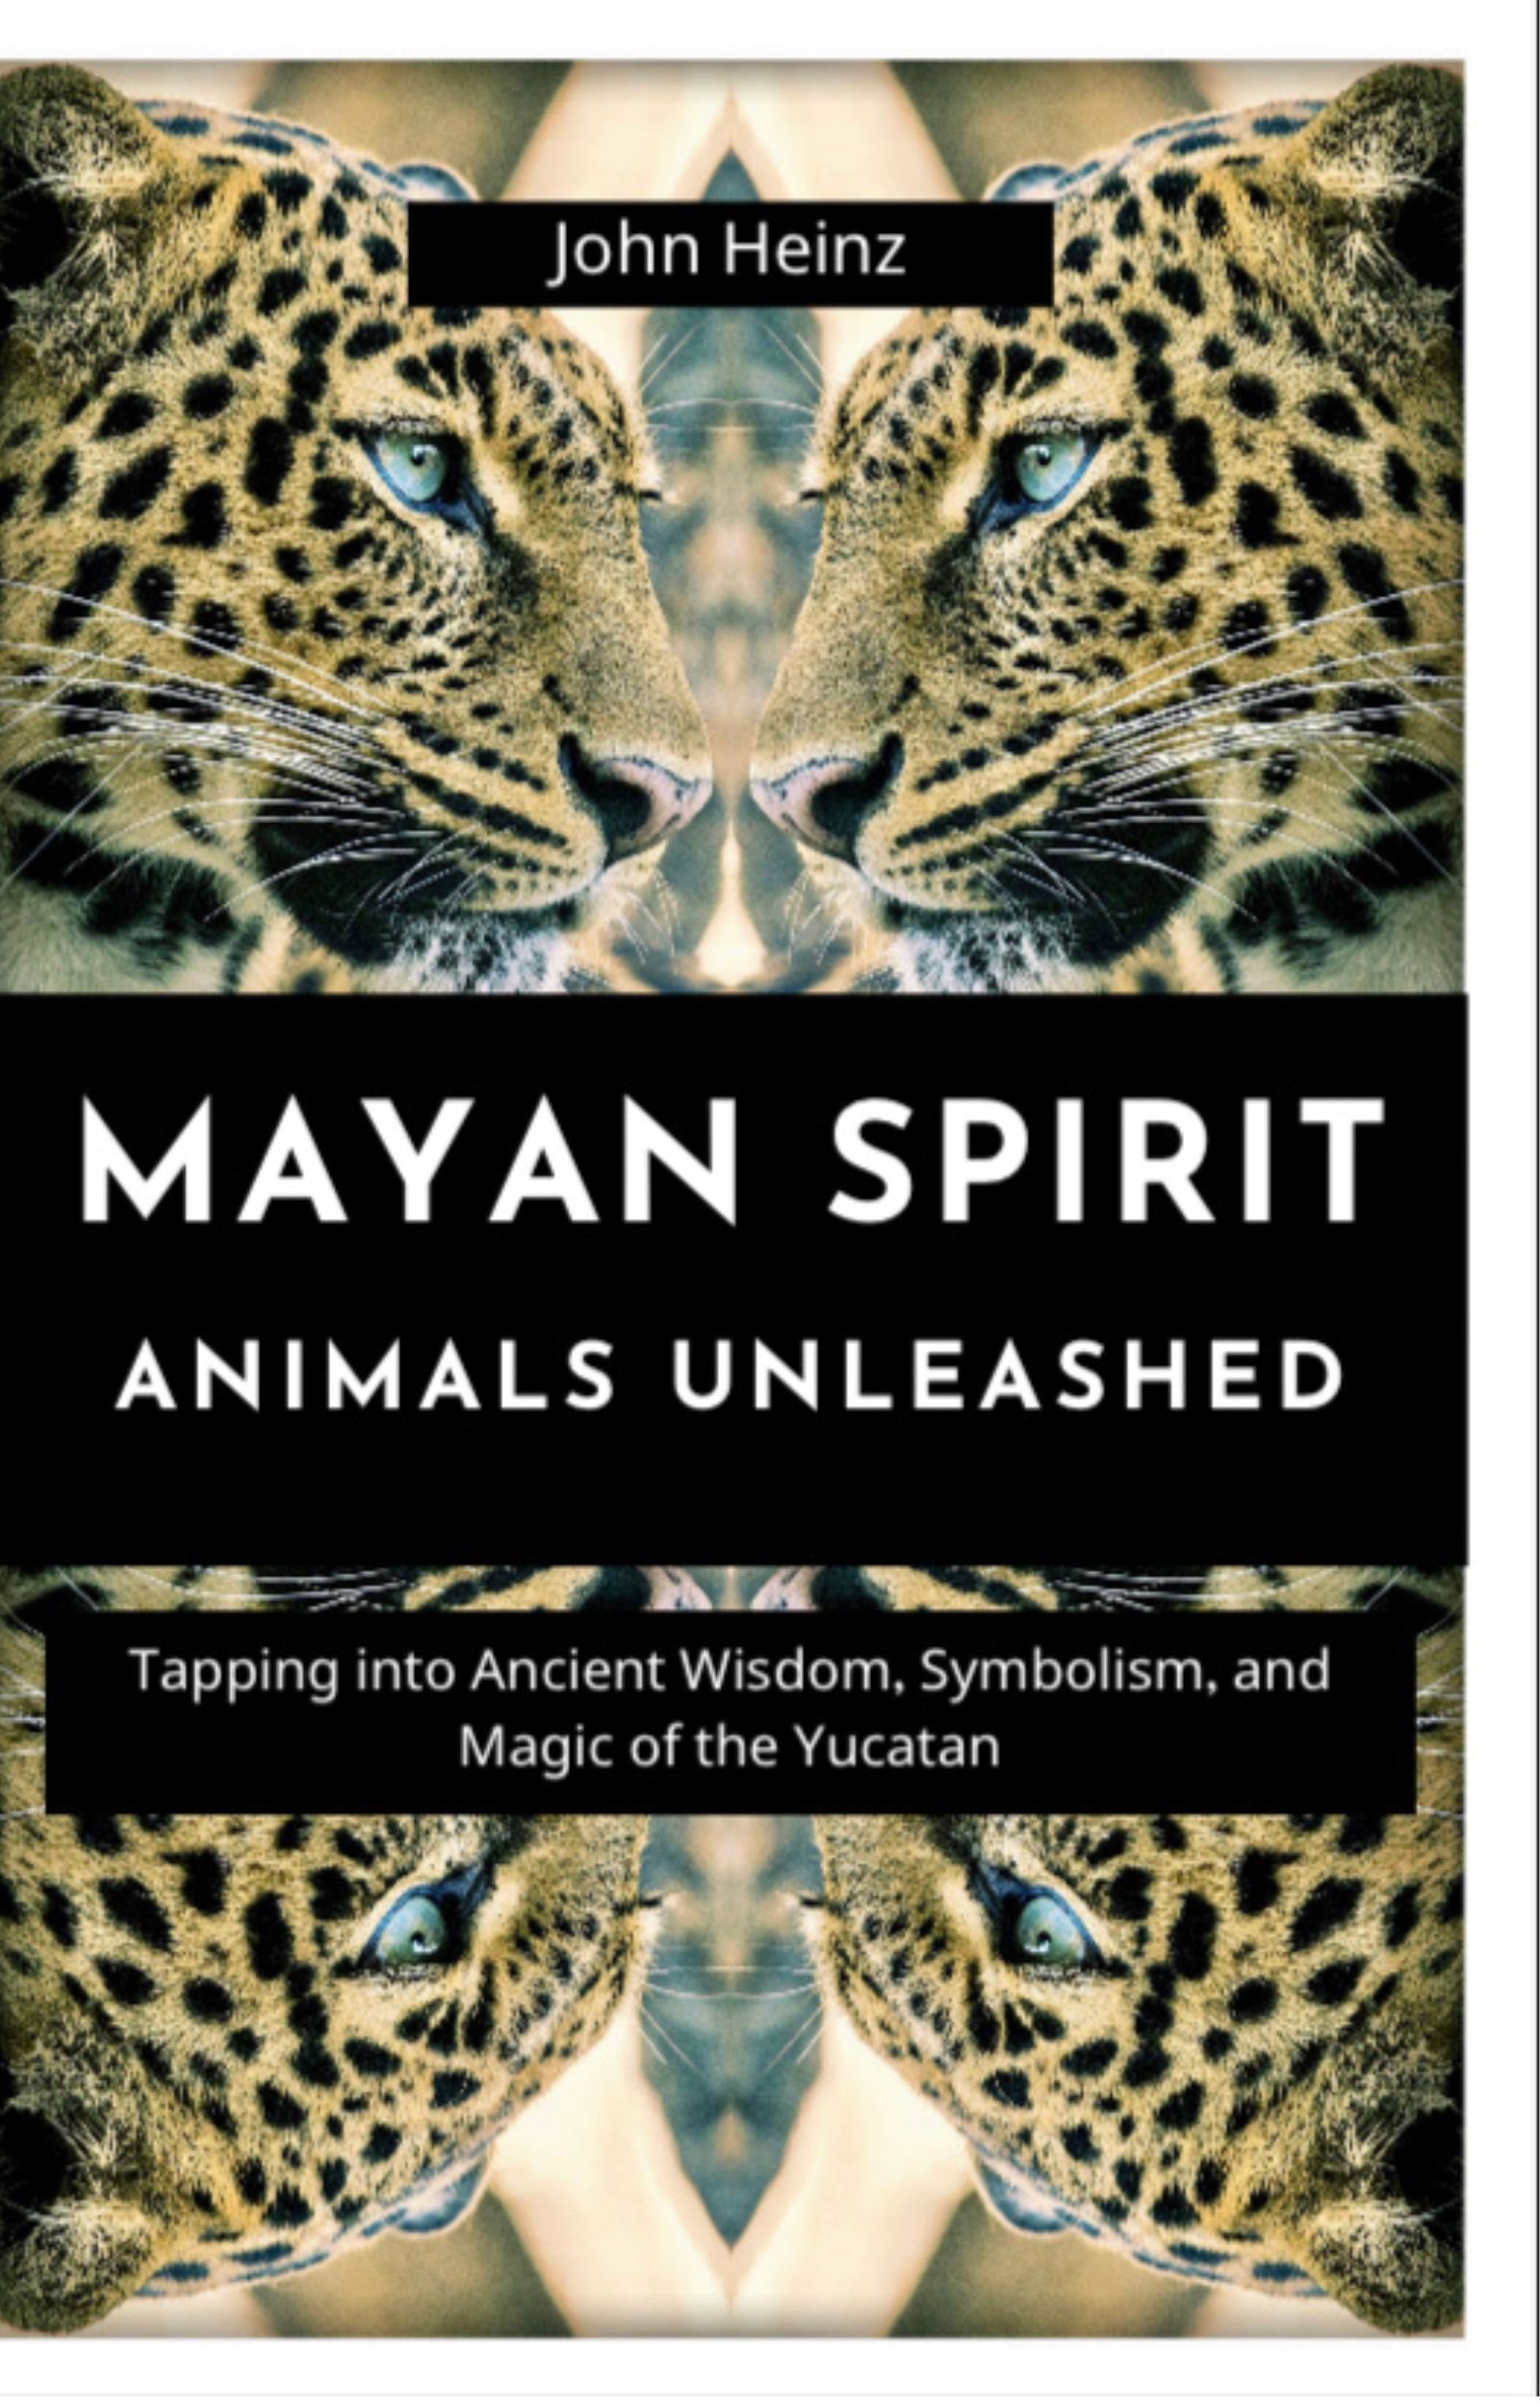 Mayan Spirit Animals Unleashed: Tapping into Ancient Wisdom, Symbolism, and Magic of the Yucatan